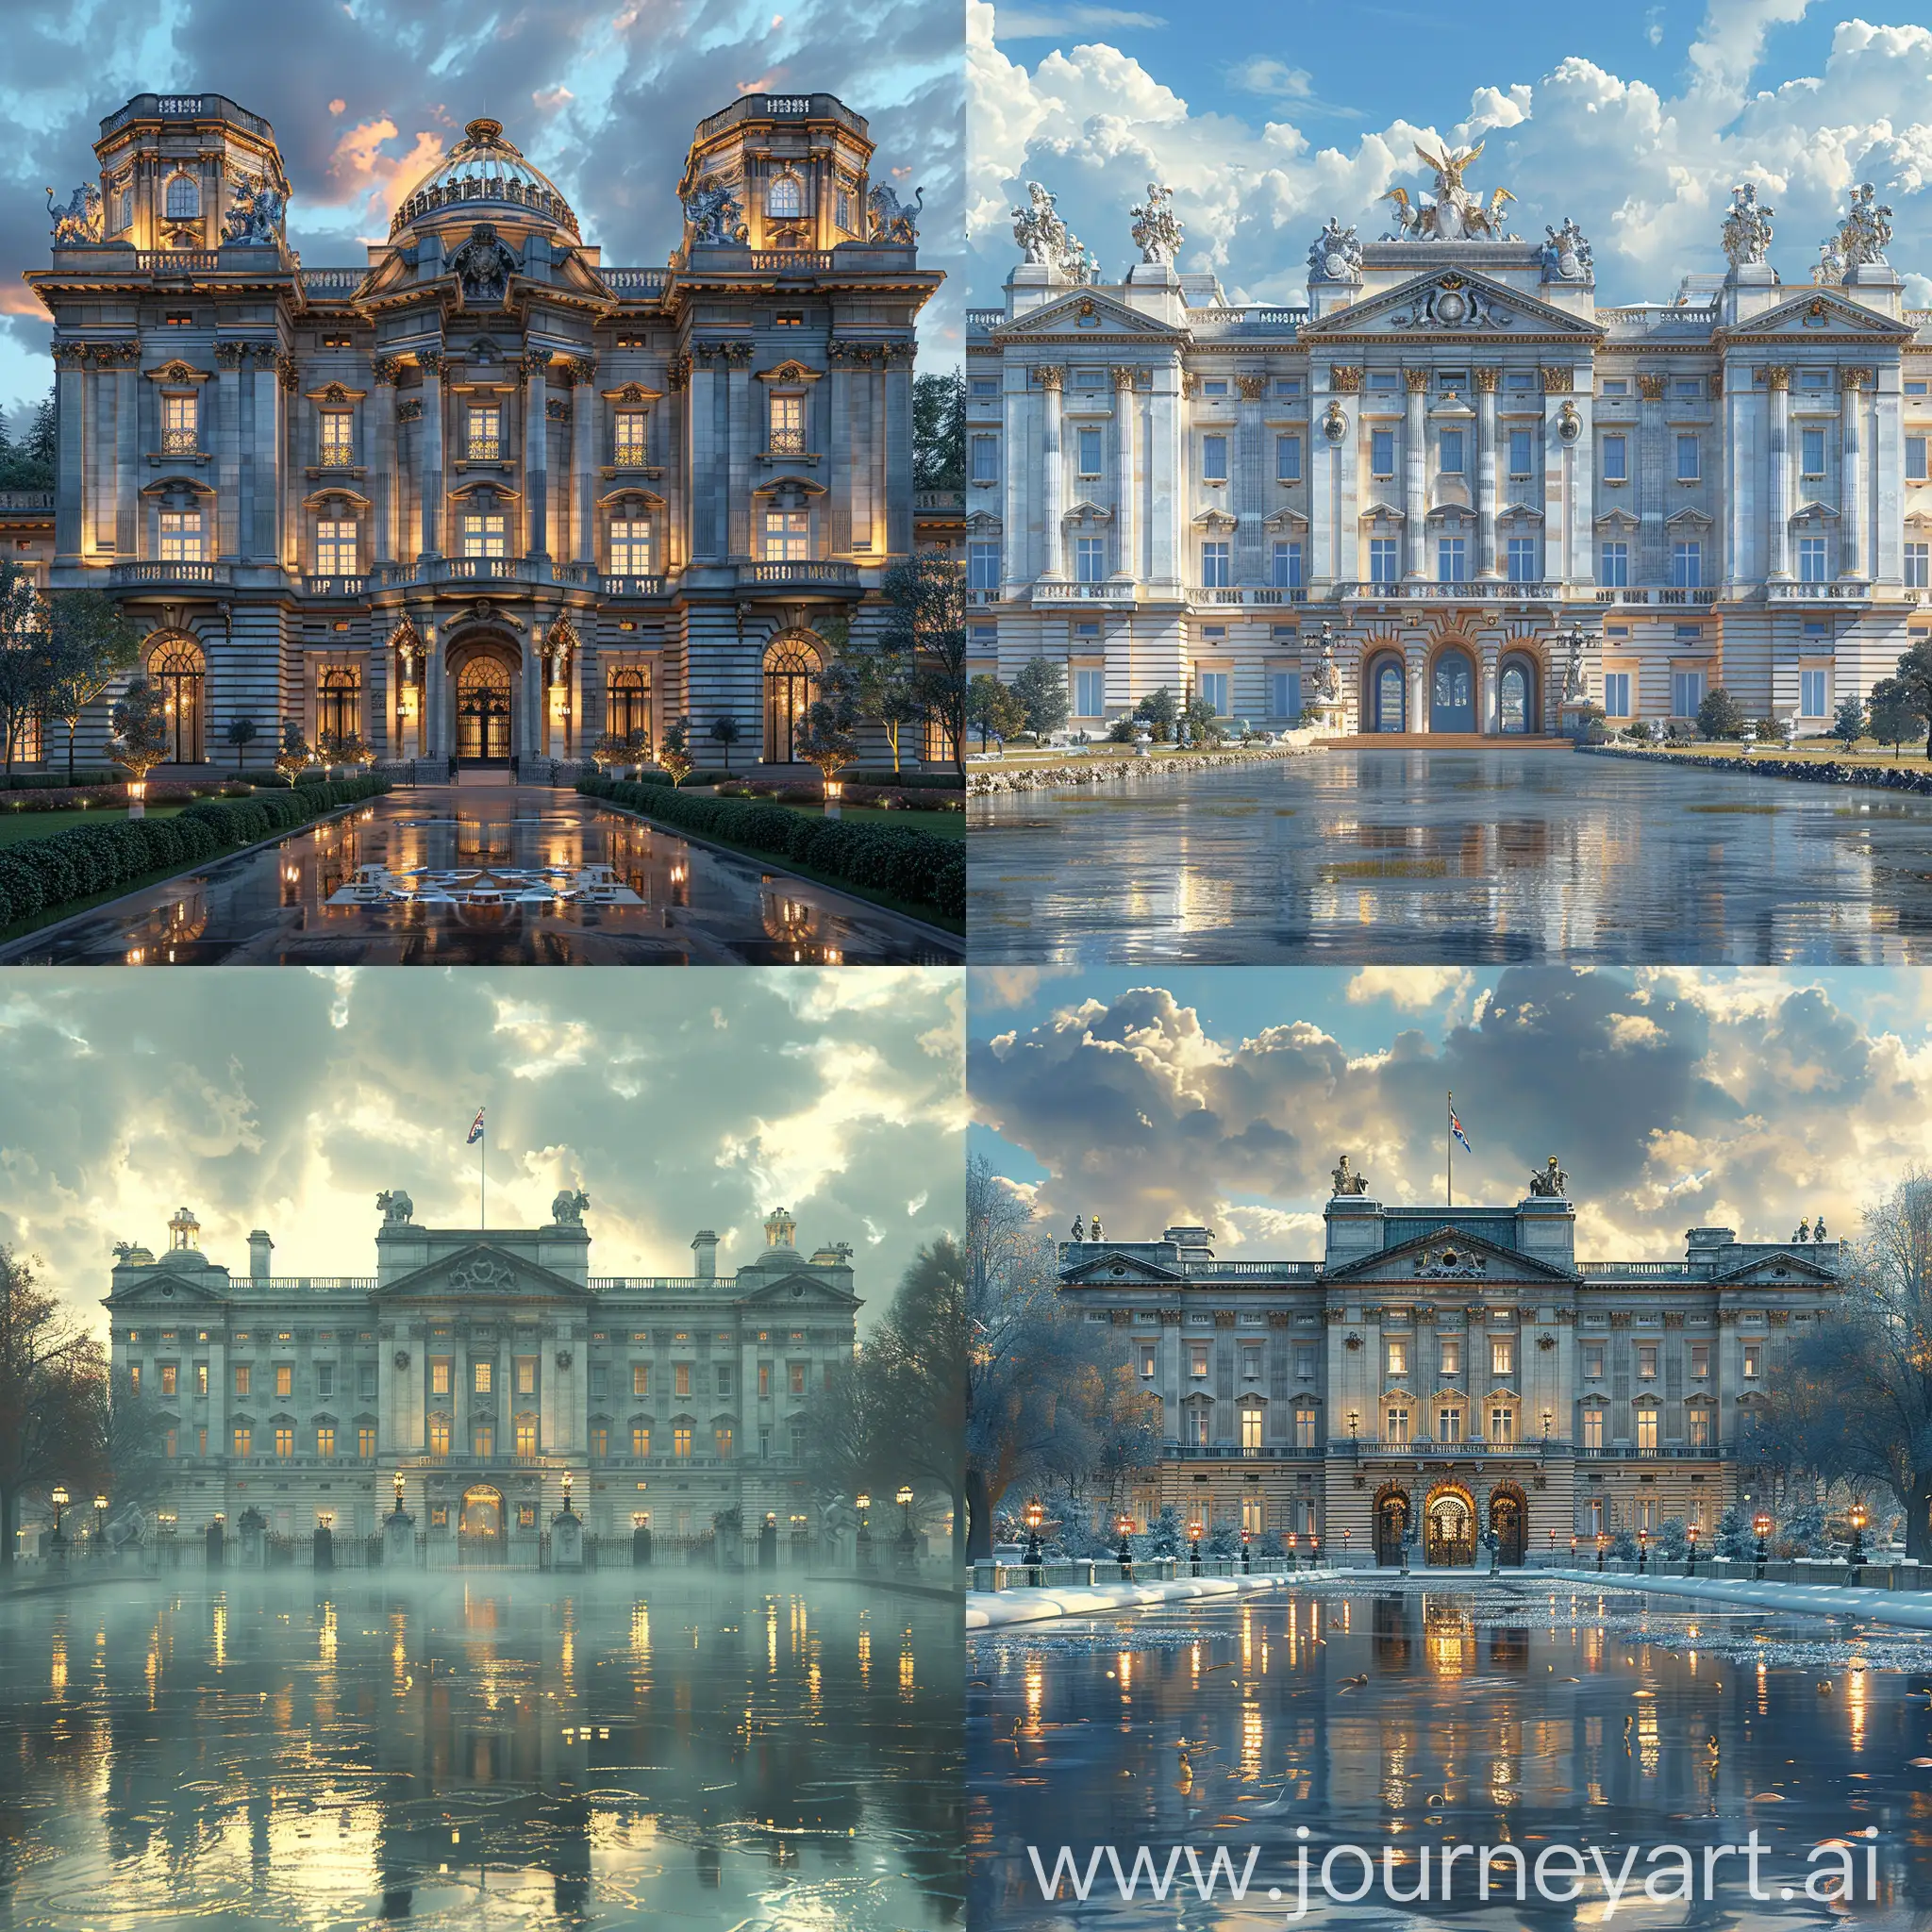 Futuristic-Buckingham-Palace-HighTech-Architectural-Marvel-in-Octane-Render